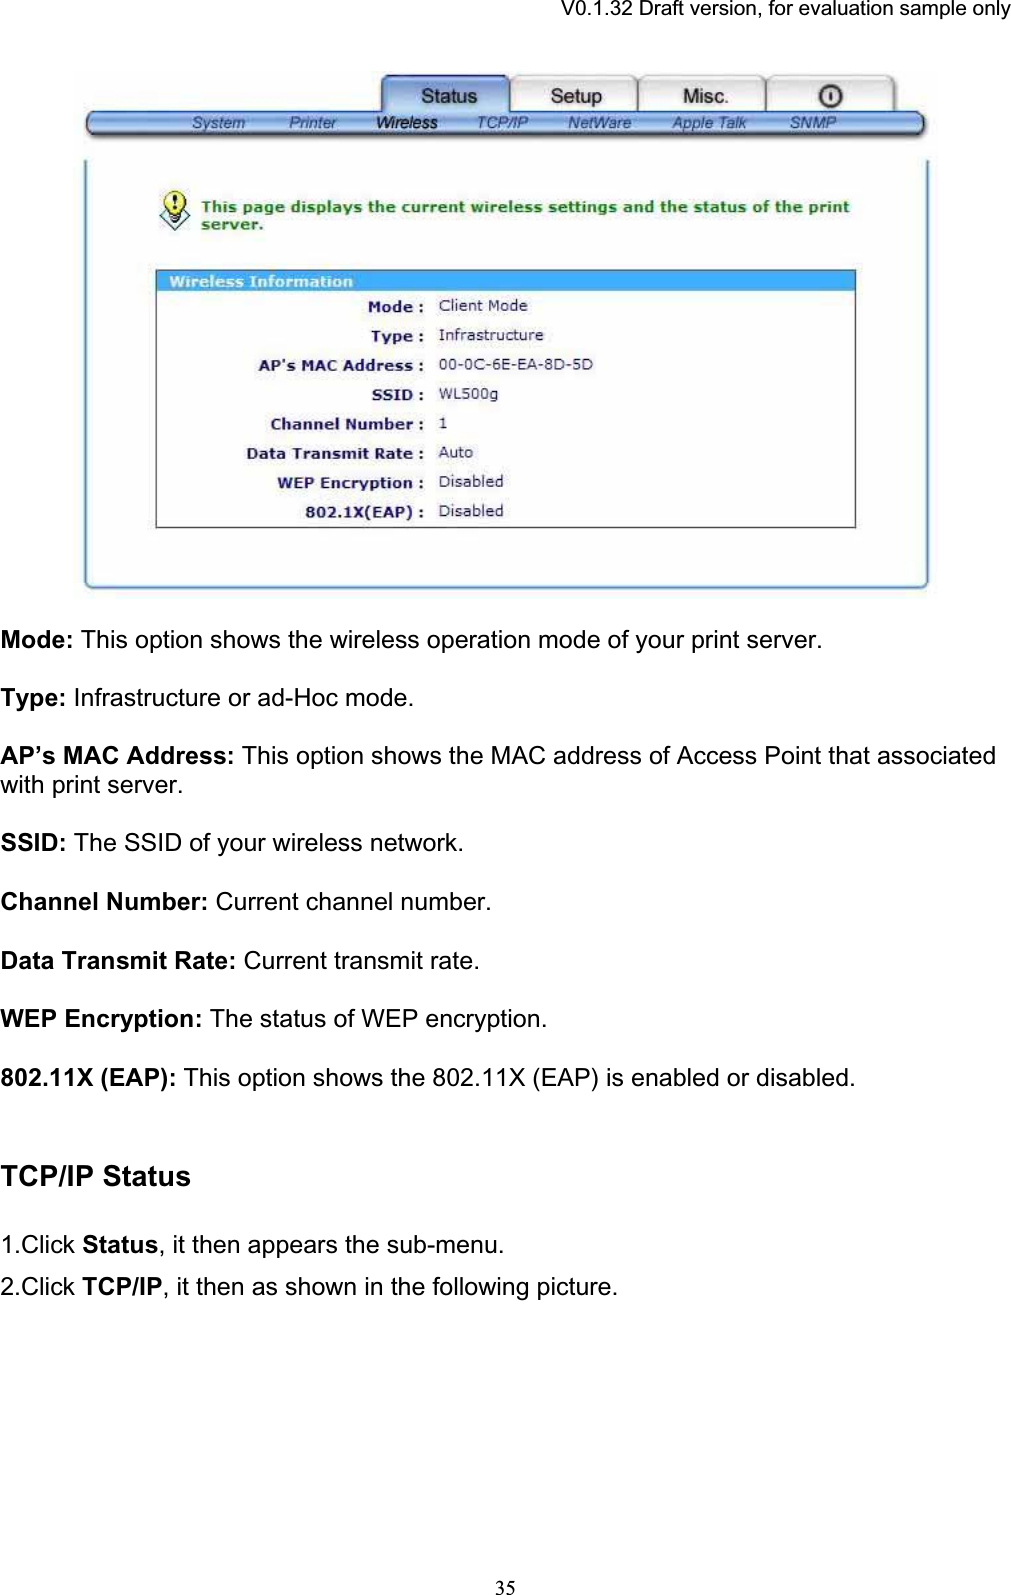 V0.1.32 Draft version, for evaluation sample onlyMode: This option shows the wireless operation mode of your print server. Type: Infrastructure or ad-Hoc mode. AP’s MAC Address: This option shows the MAC address of Access Point that associated with print server. SSID: The SSID of your wireless network. Channel Number: Current channel number. Data Transmit Rate: Current transmit rate.WEP Encryption: The status of WEP encryption. 802.11X (EAP): This option shows the 802.11X (EAP) is enabled or disabled. TCP/IP Status1.Click Status, it then appears the sub-menu. 2.Click TCP/IP, it then as shown in the following picture. 35